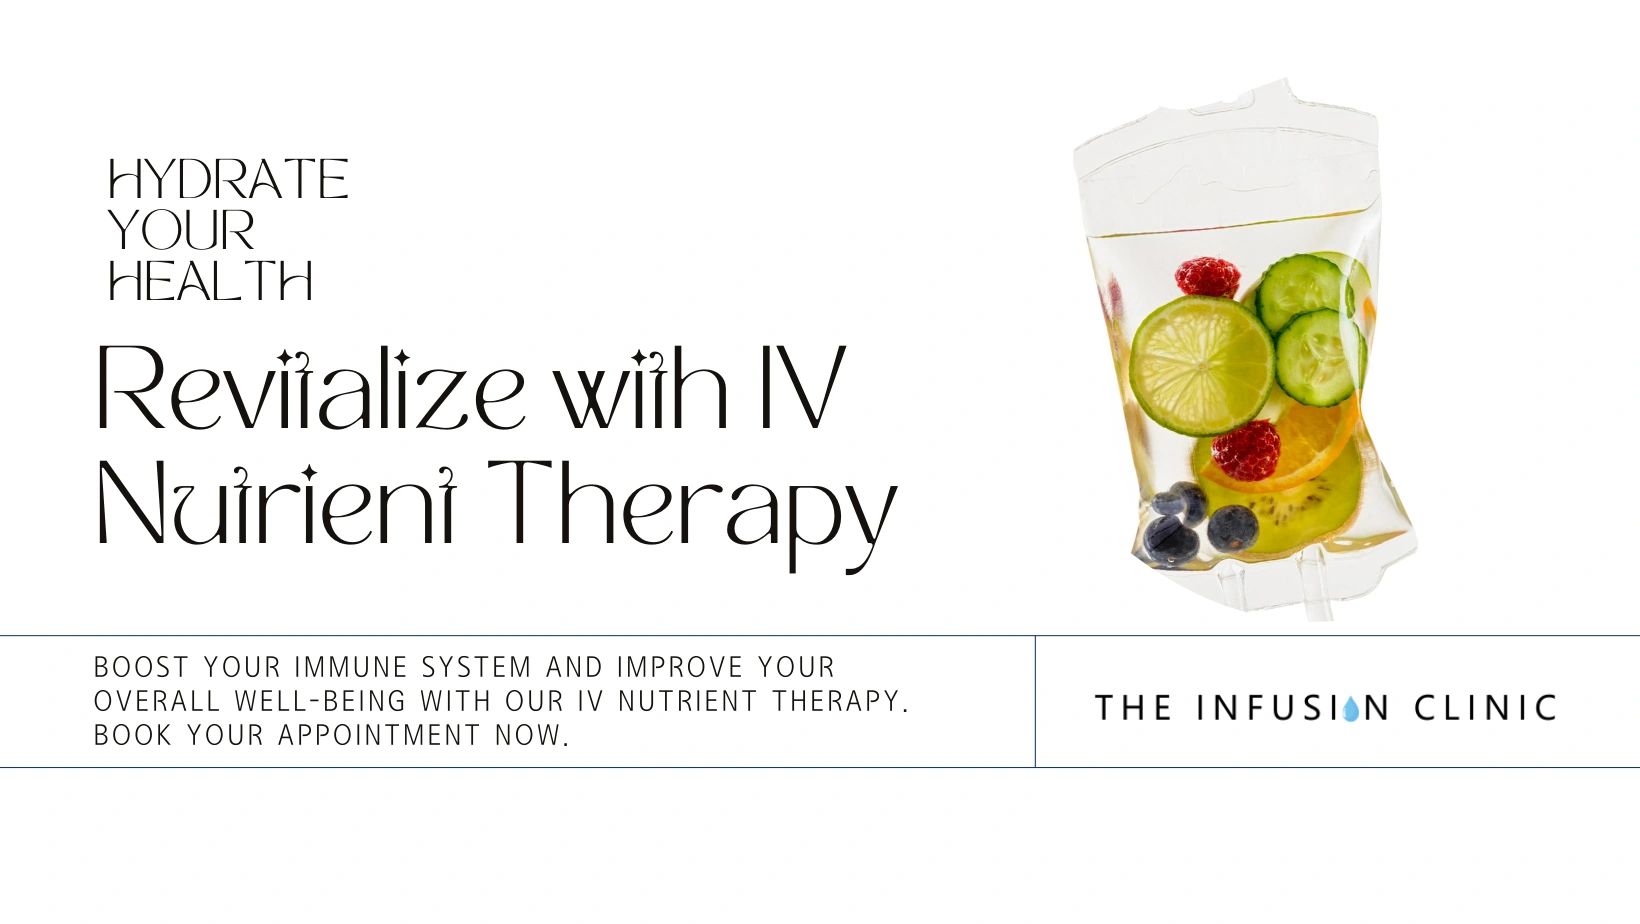 Clinics offering vitamin therapy through IV bring trend to mid